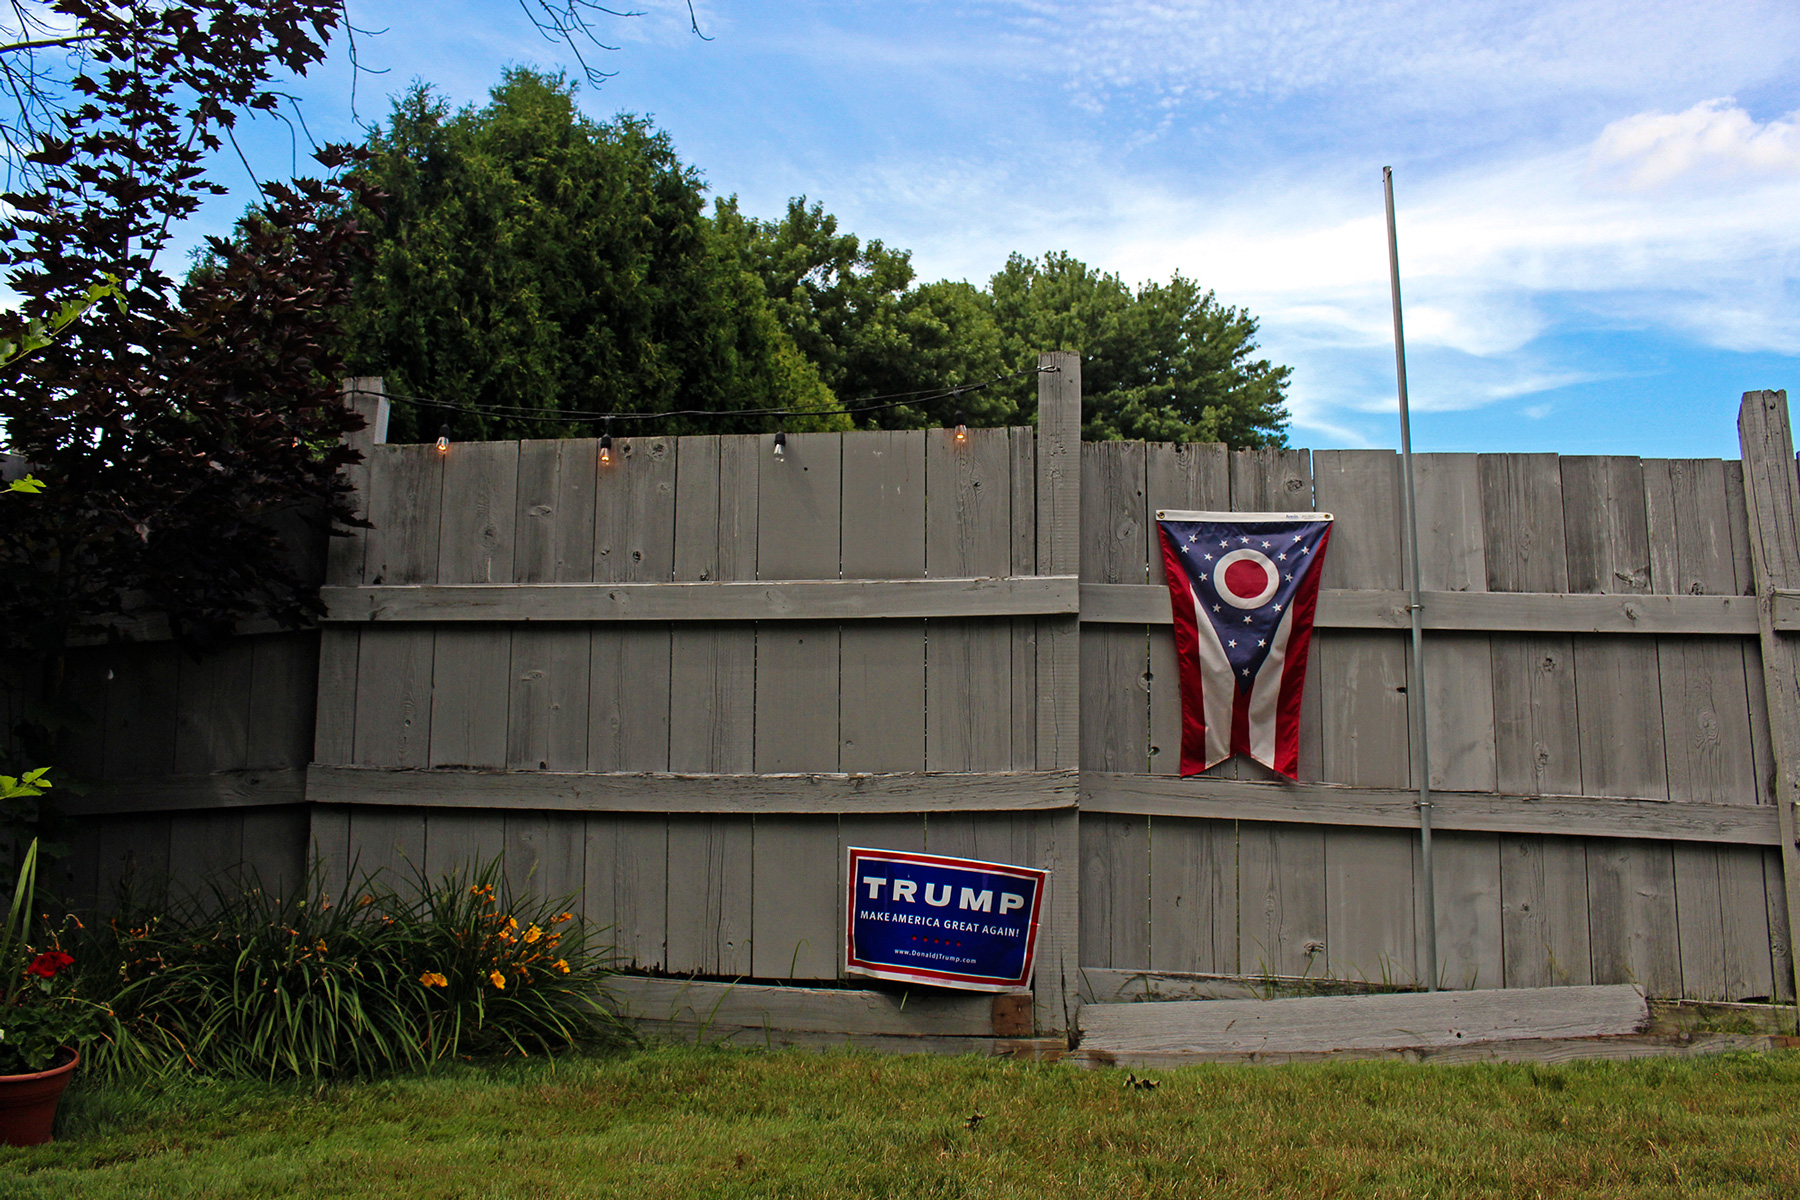 A Donald Trump campaign sign and Ohio state flag decorate the backyard of Kathy Miller, the Mahoning County chairwoman for Trump, in Boardman, Ohio. Miller is leading a grassroots movement encouraging Democratic voters to vote for Trump in November’s general election. (Emily Mills/News21)